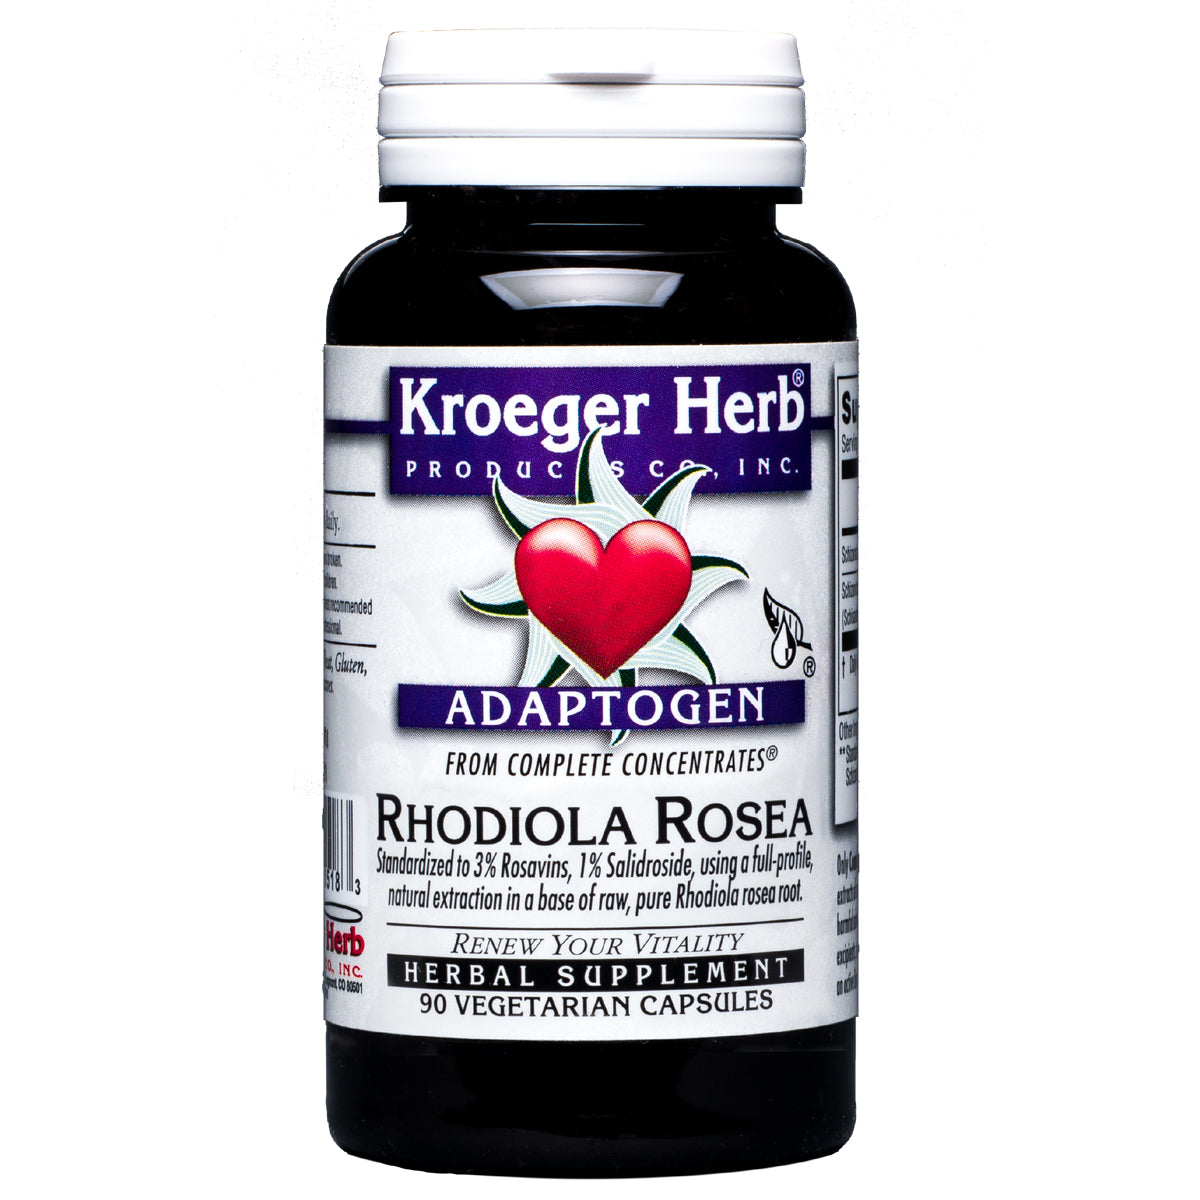 Rhodiola Rosea Complete Concentrate® on sale!